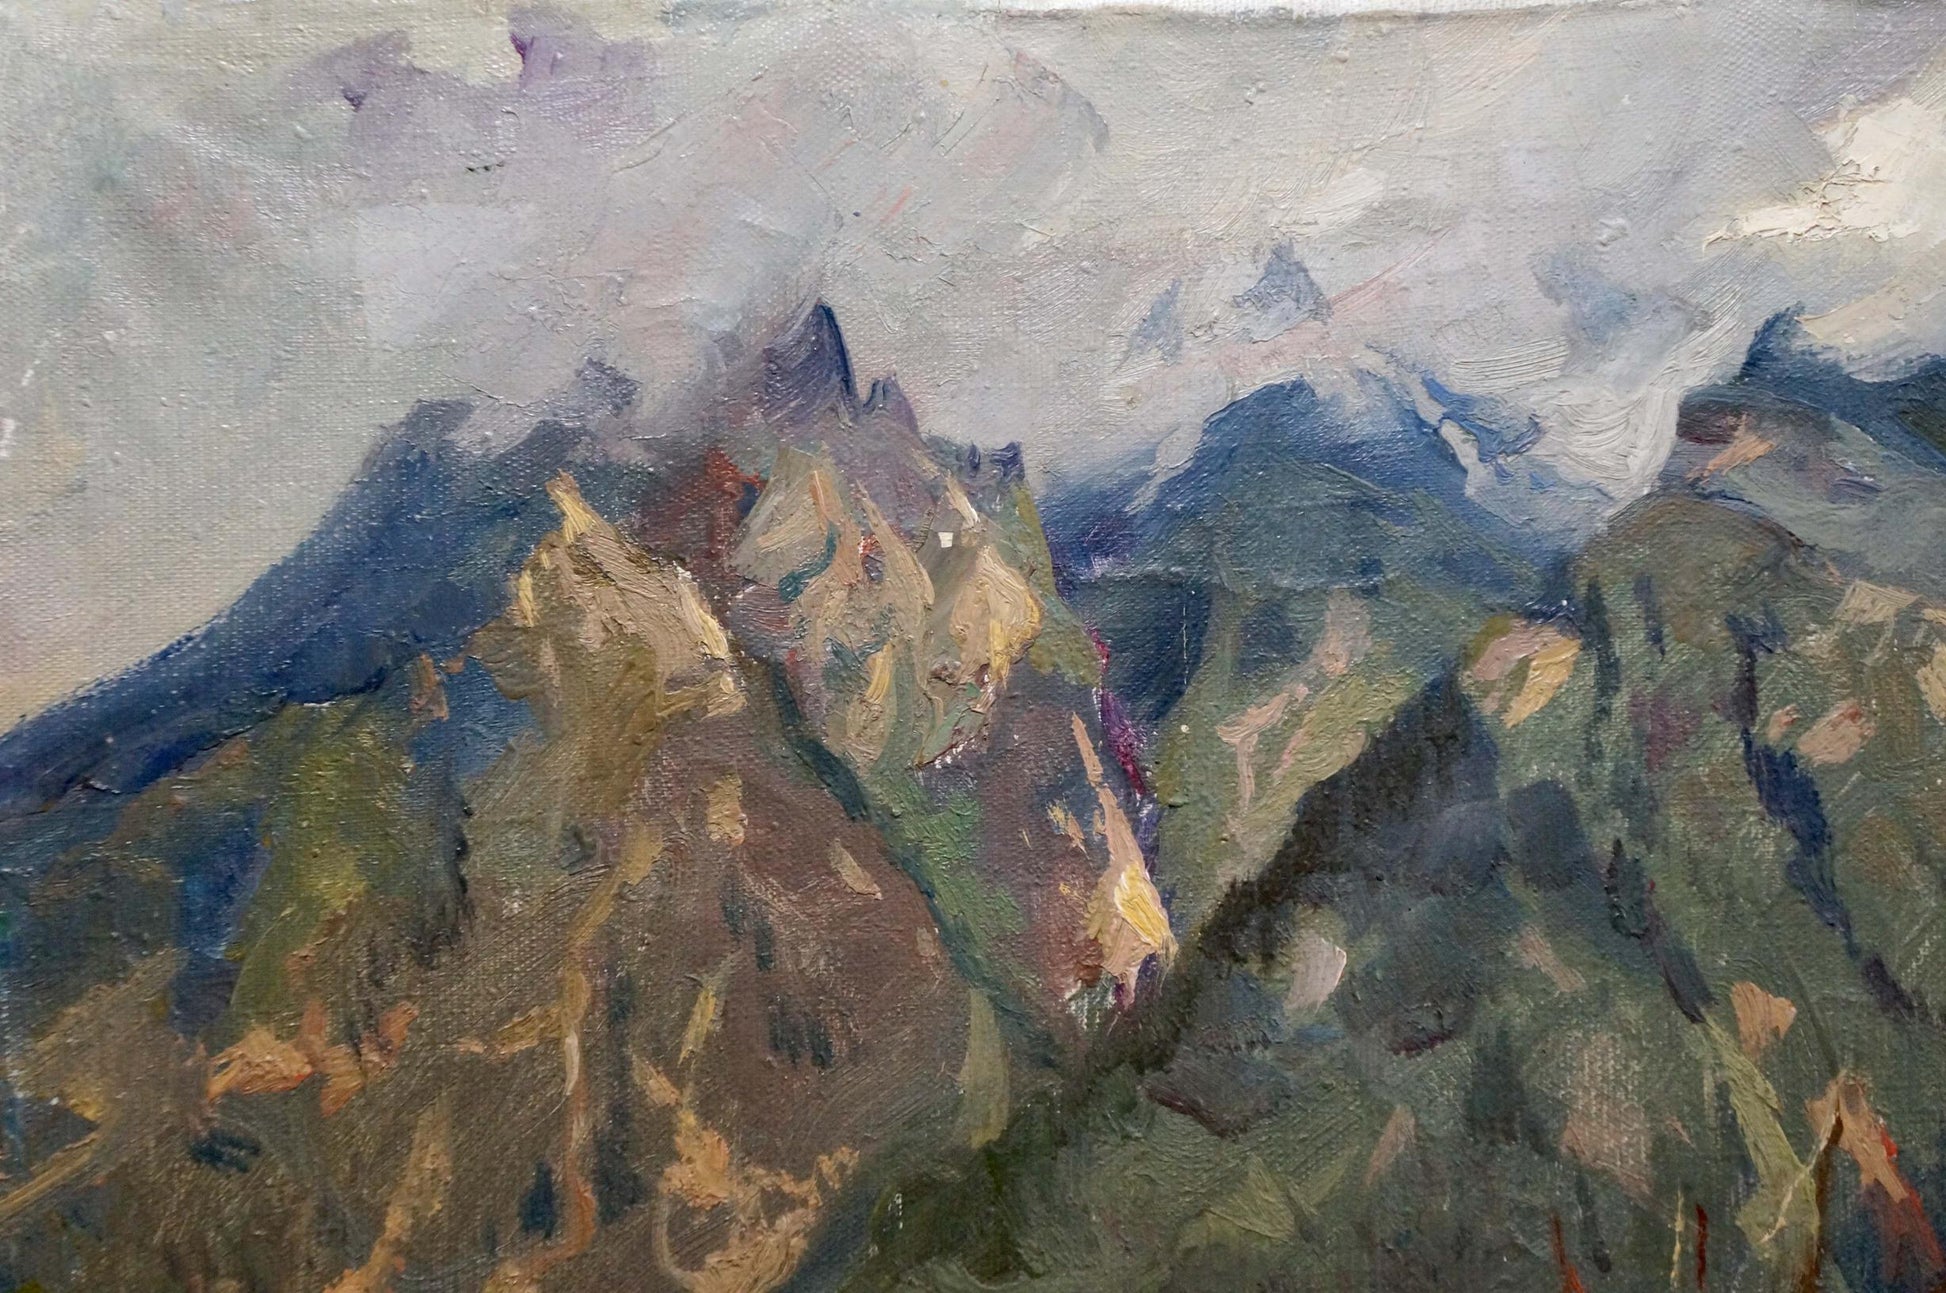 Mountain peaks surrounded by clouds were captured in an oil painting by an unknown artist